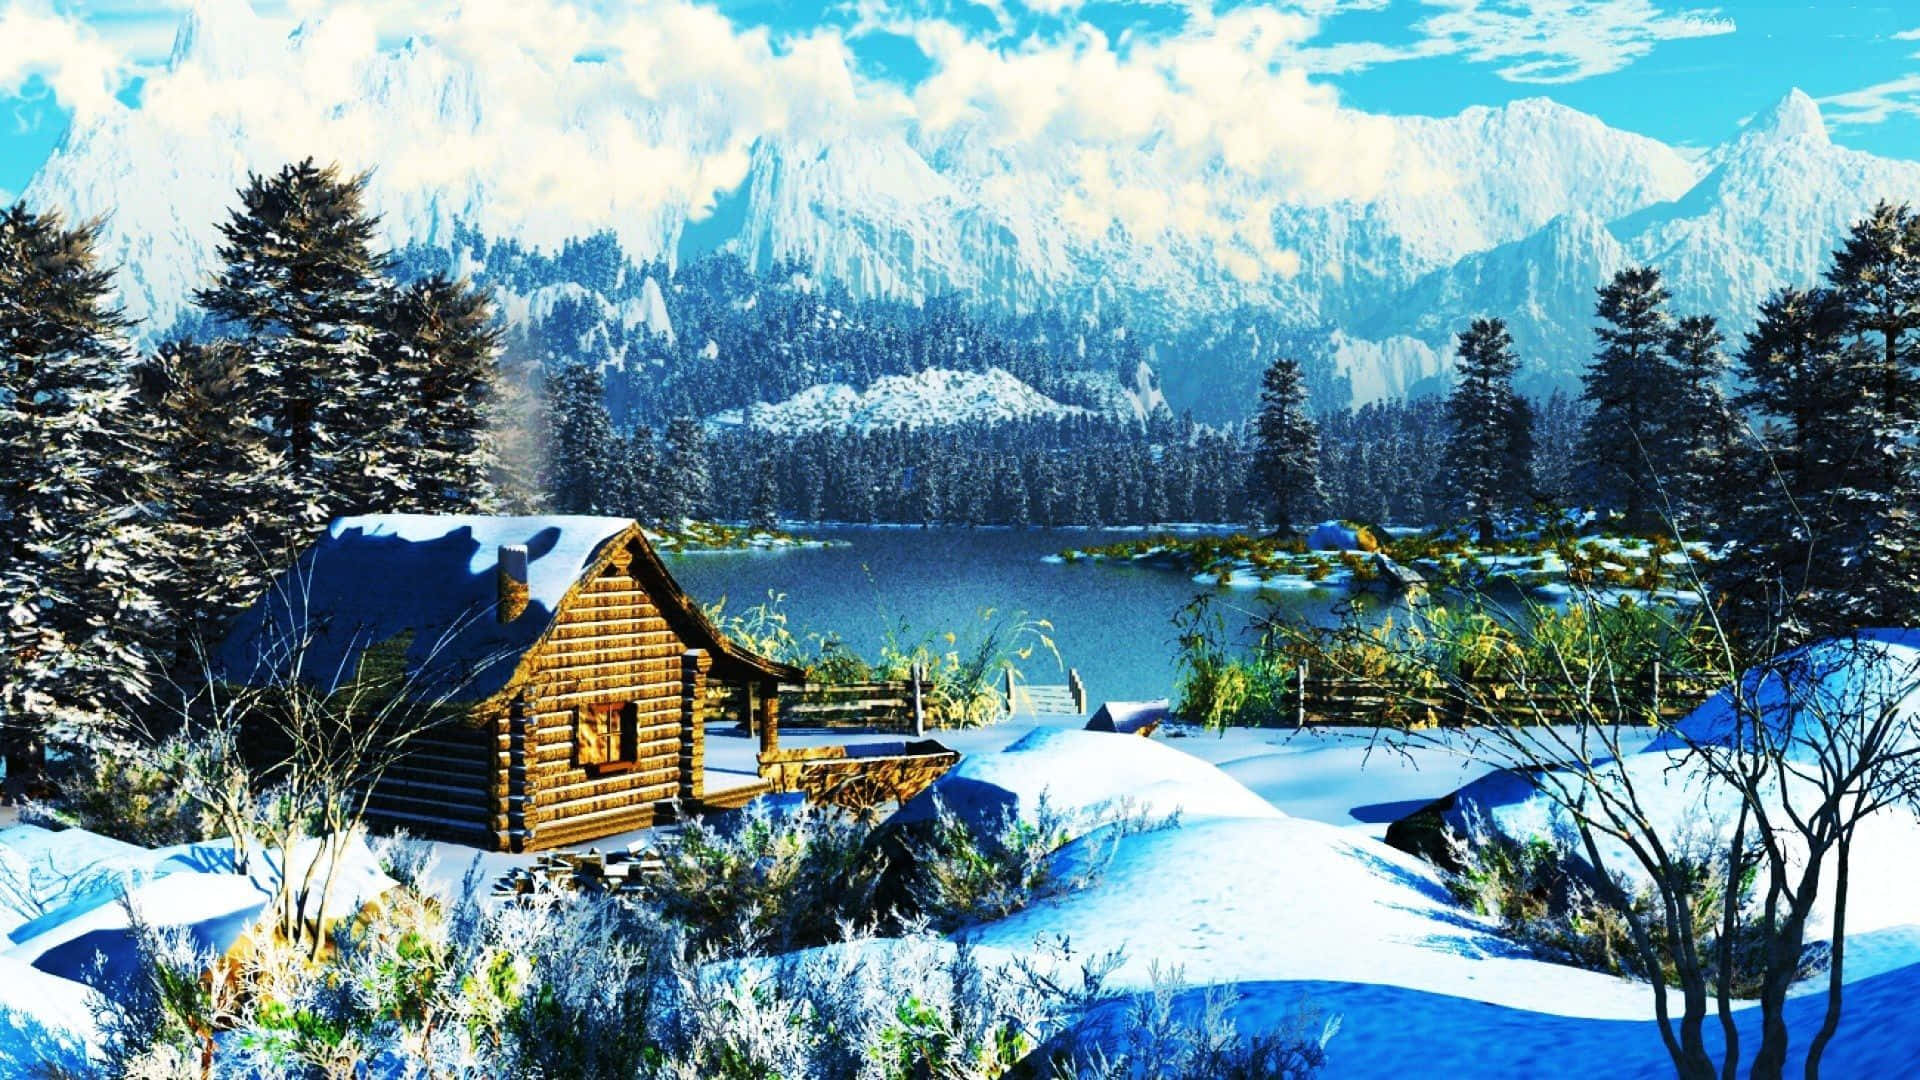 Cabin Realistic Painting Wallpaper